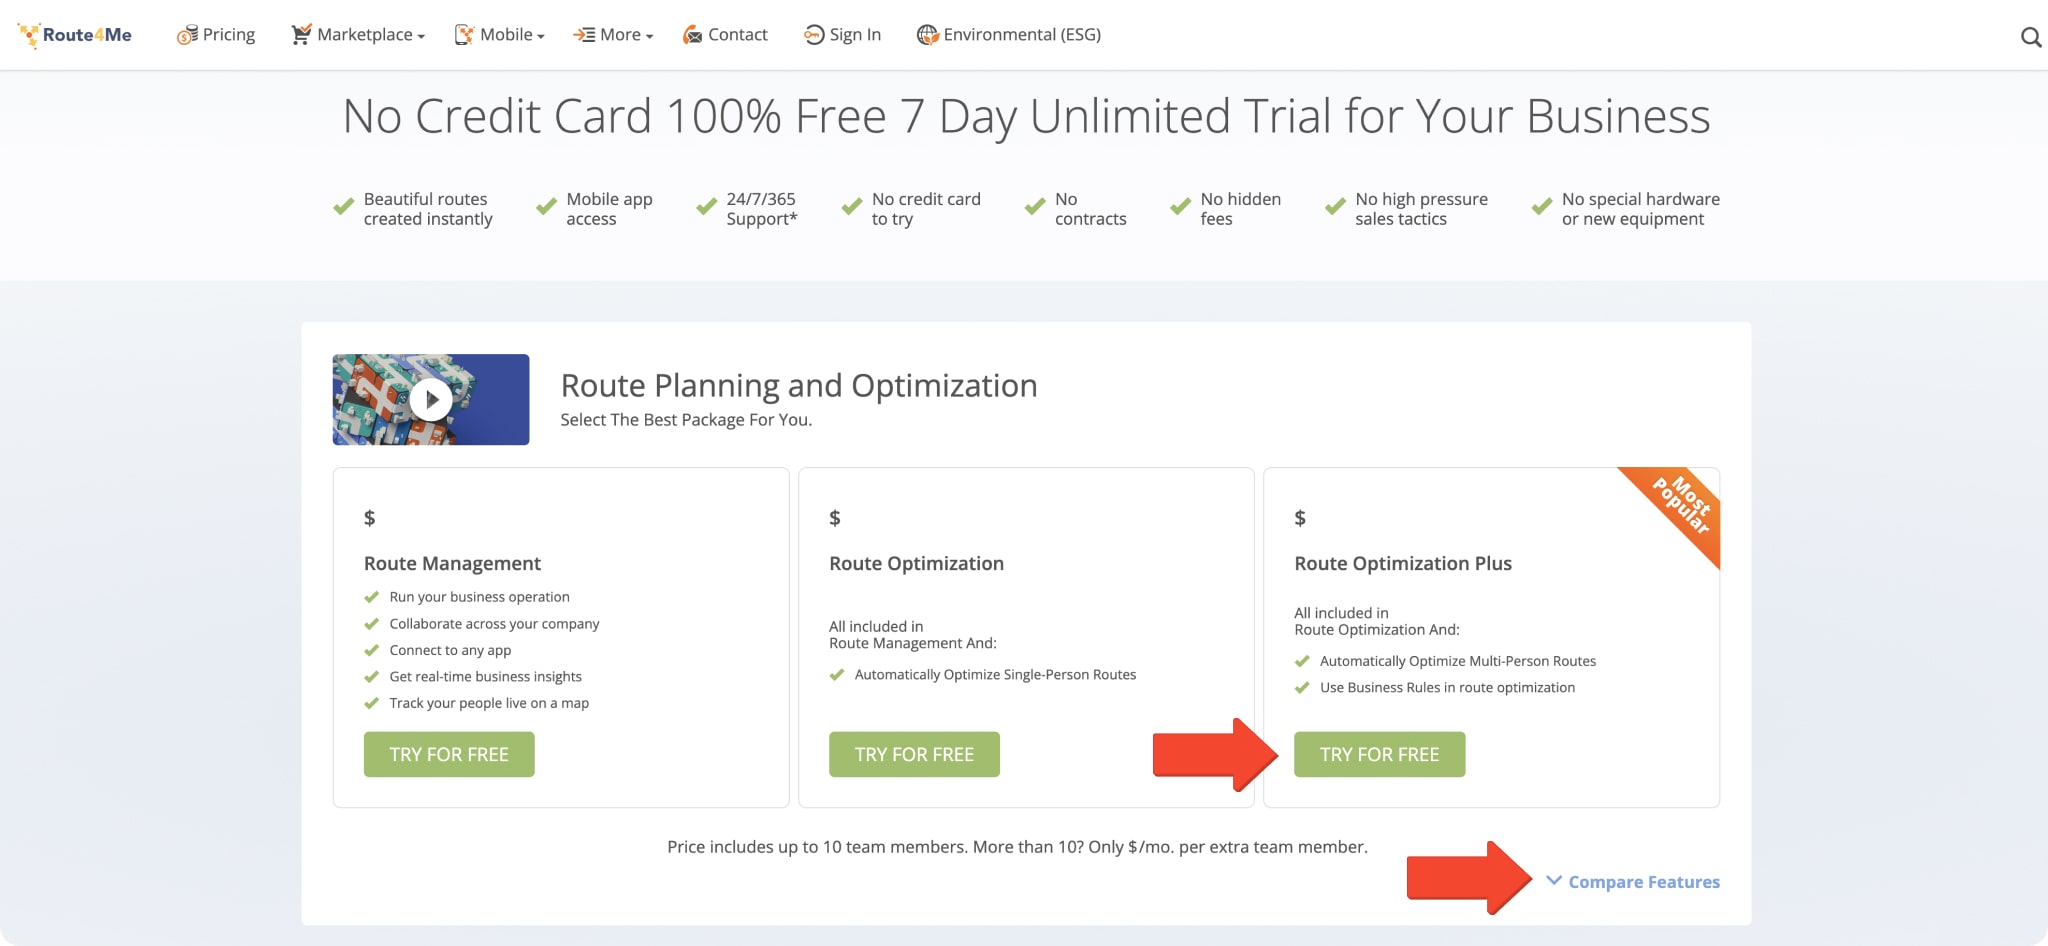 On the Route4Me Pricing page, you can find information about Route4Me's Route Planning and Optimization packages and subscriptions.